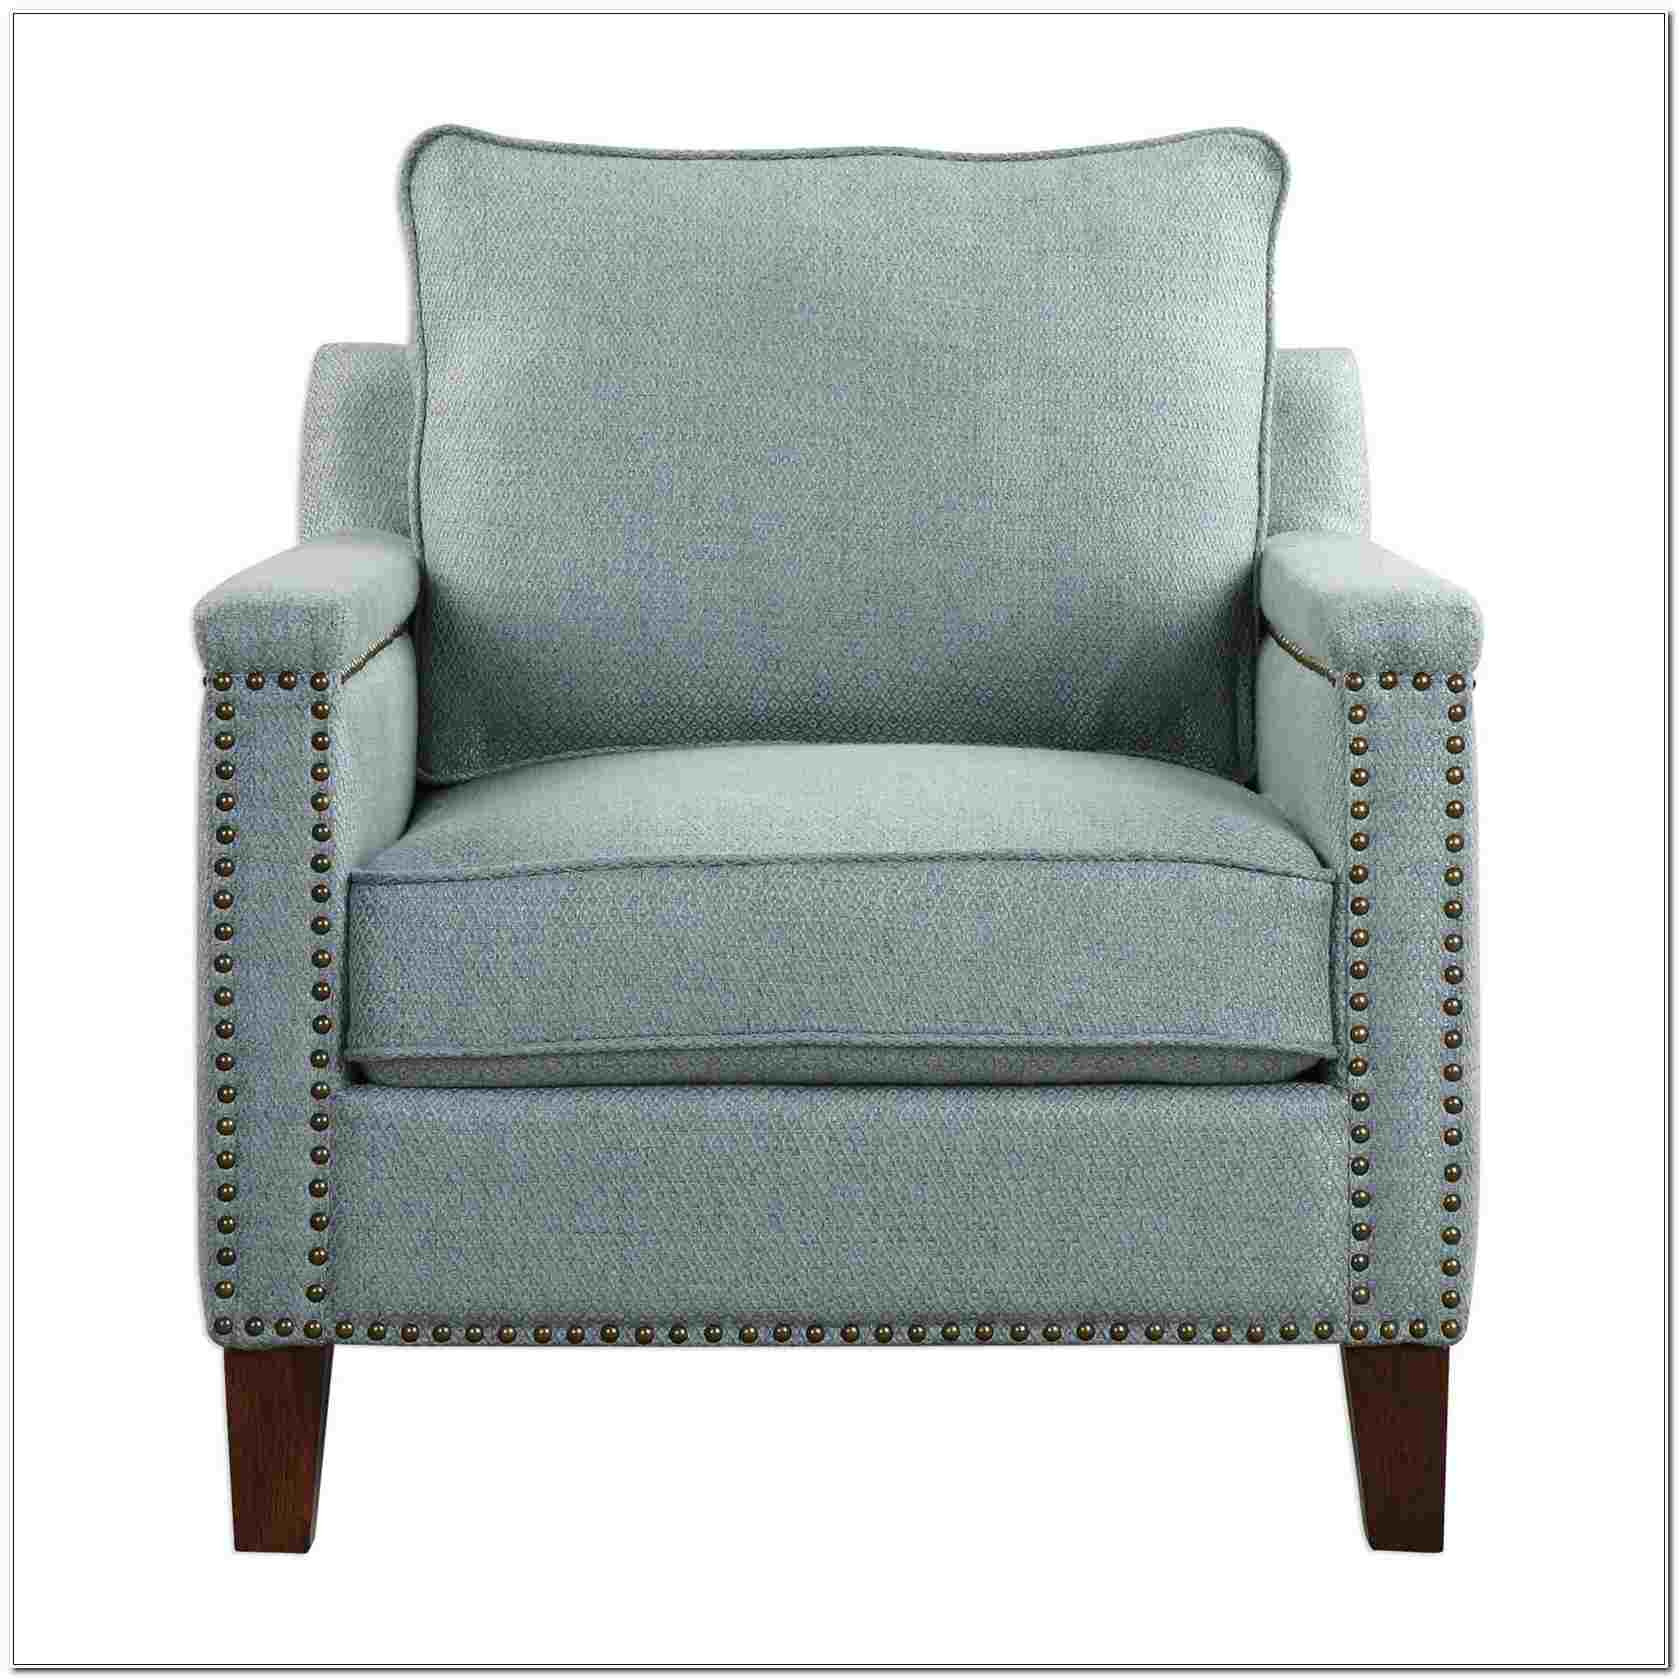 Small Upholstered Chair For Bedroom
 Small Upholstered Chair For Bedroom – Bedroom Ideas